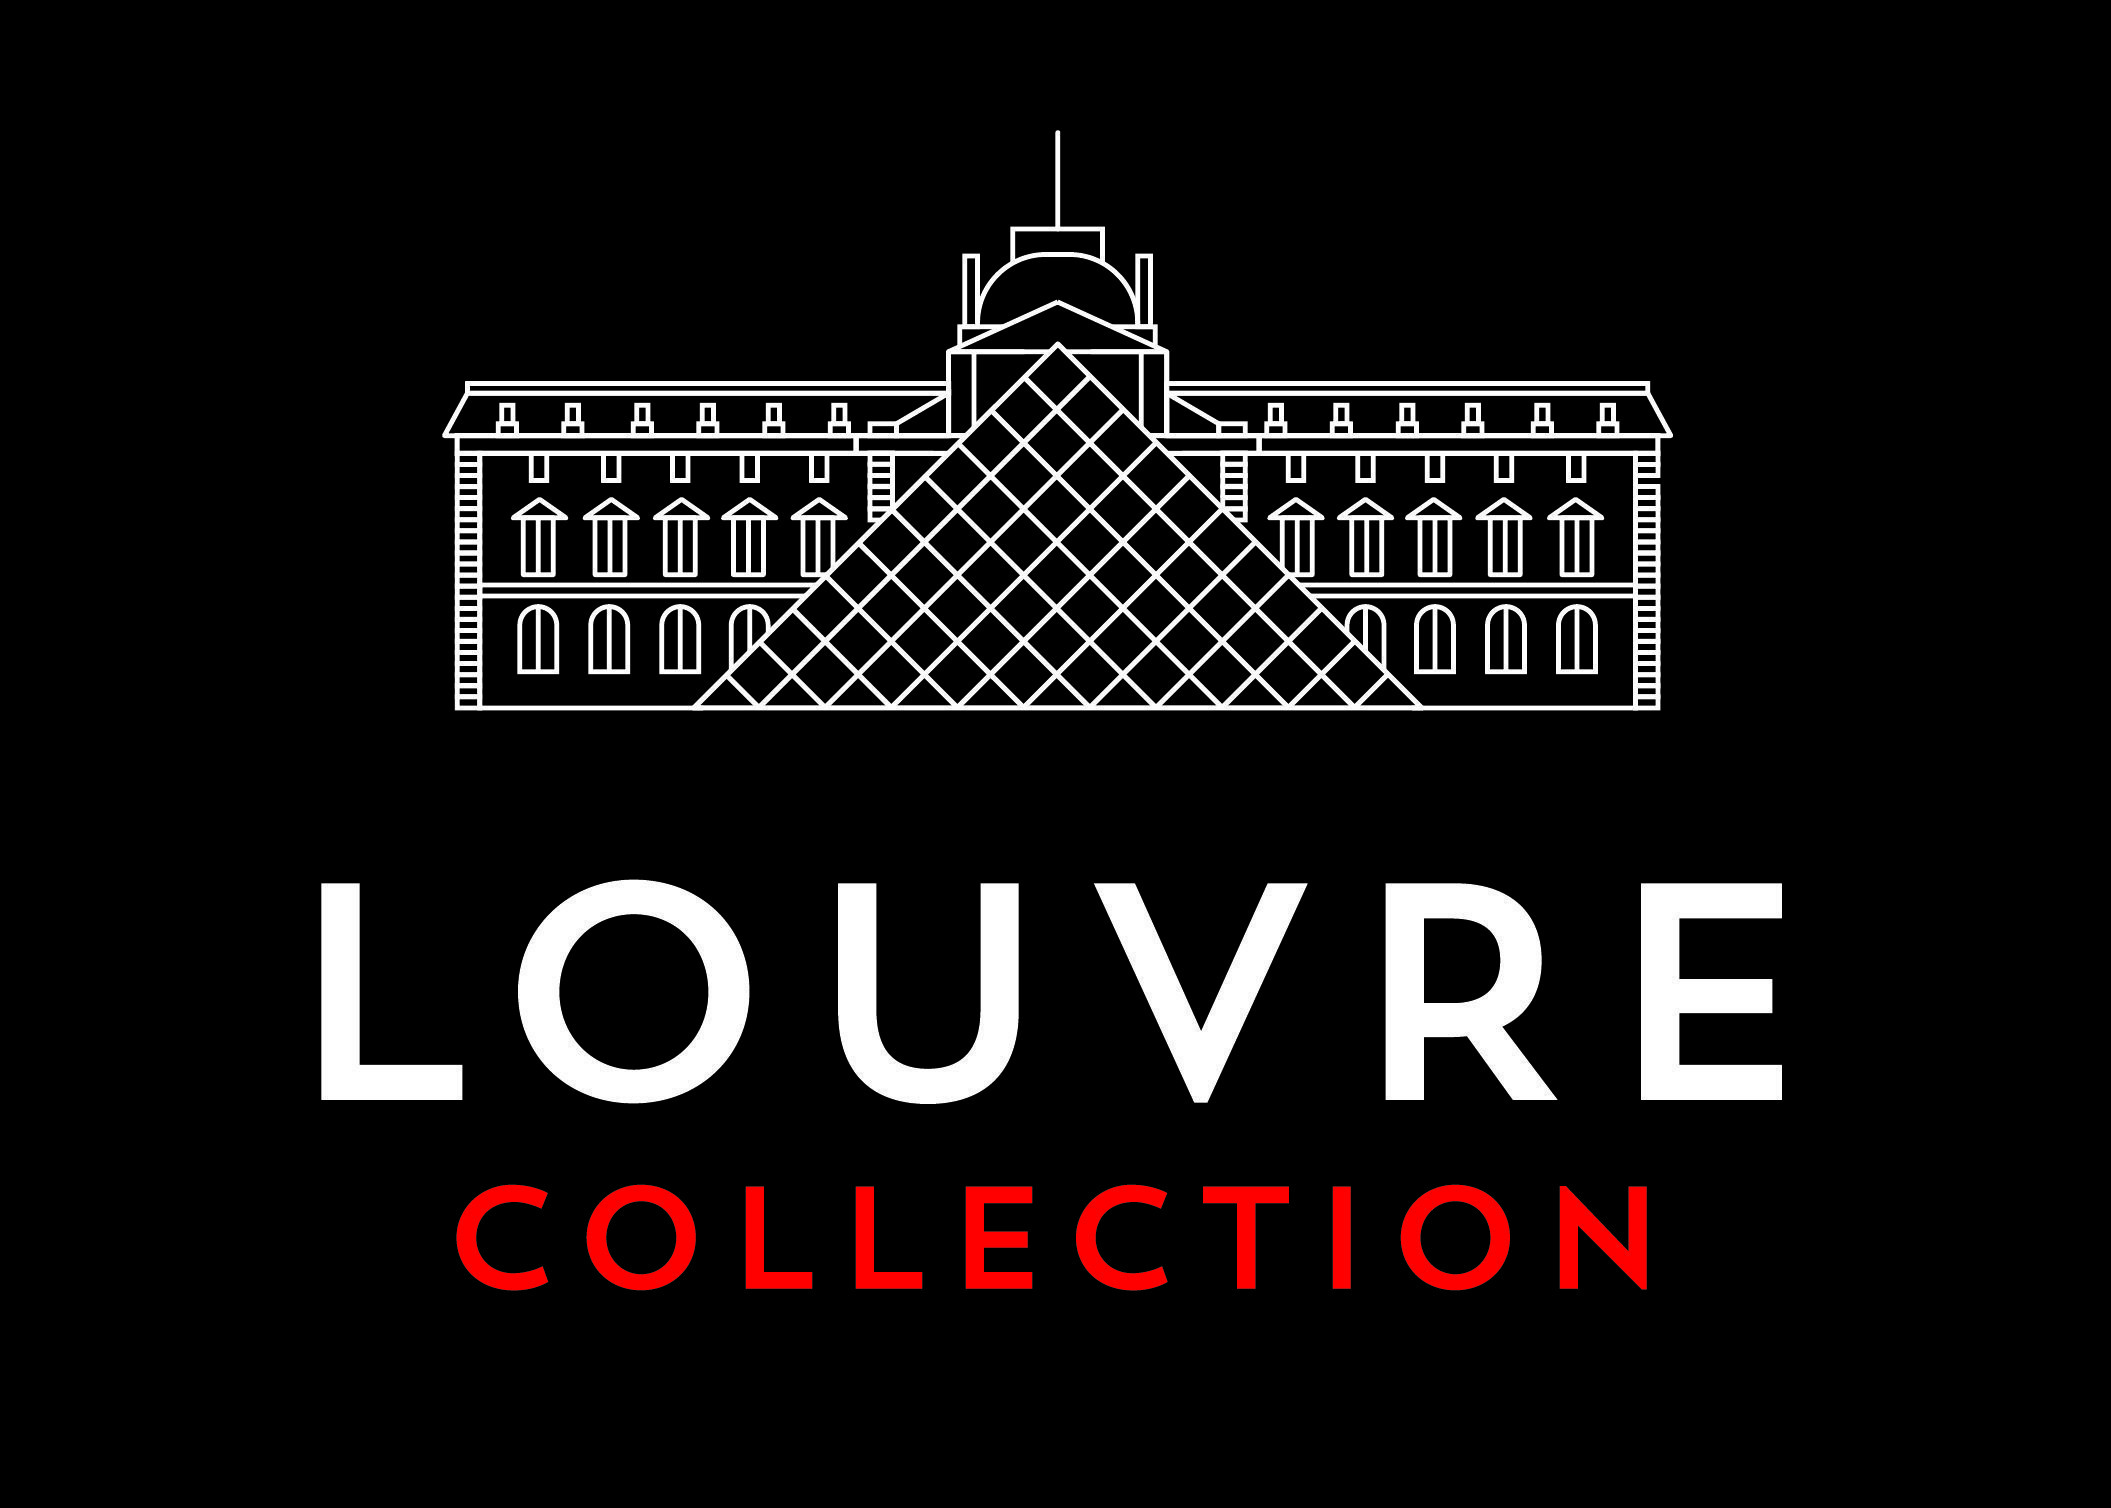 Louvre_Collection_Logo_Blk_Background